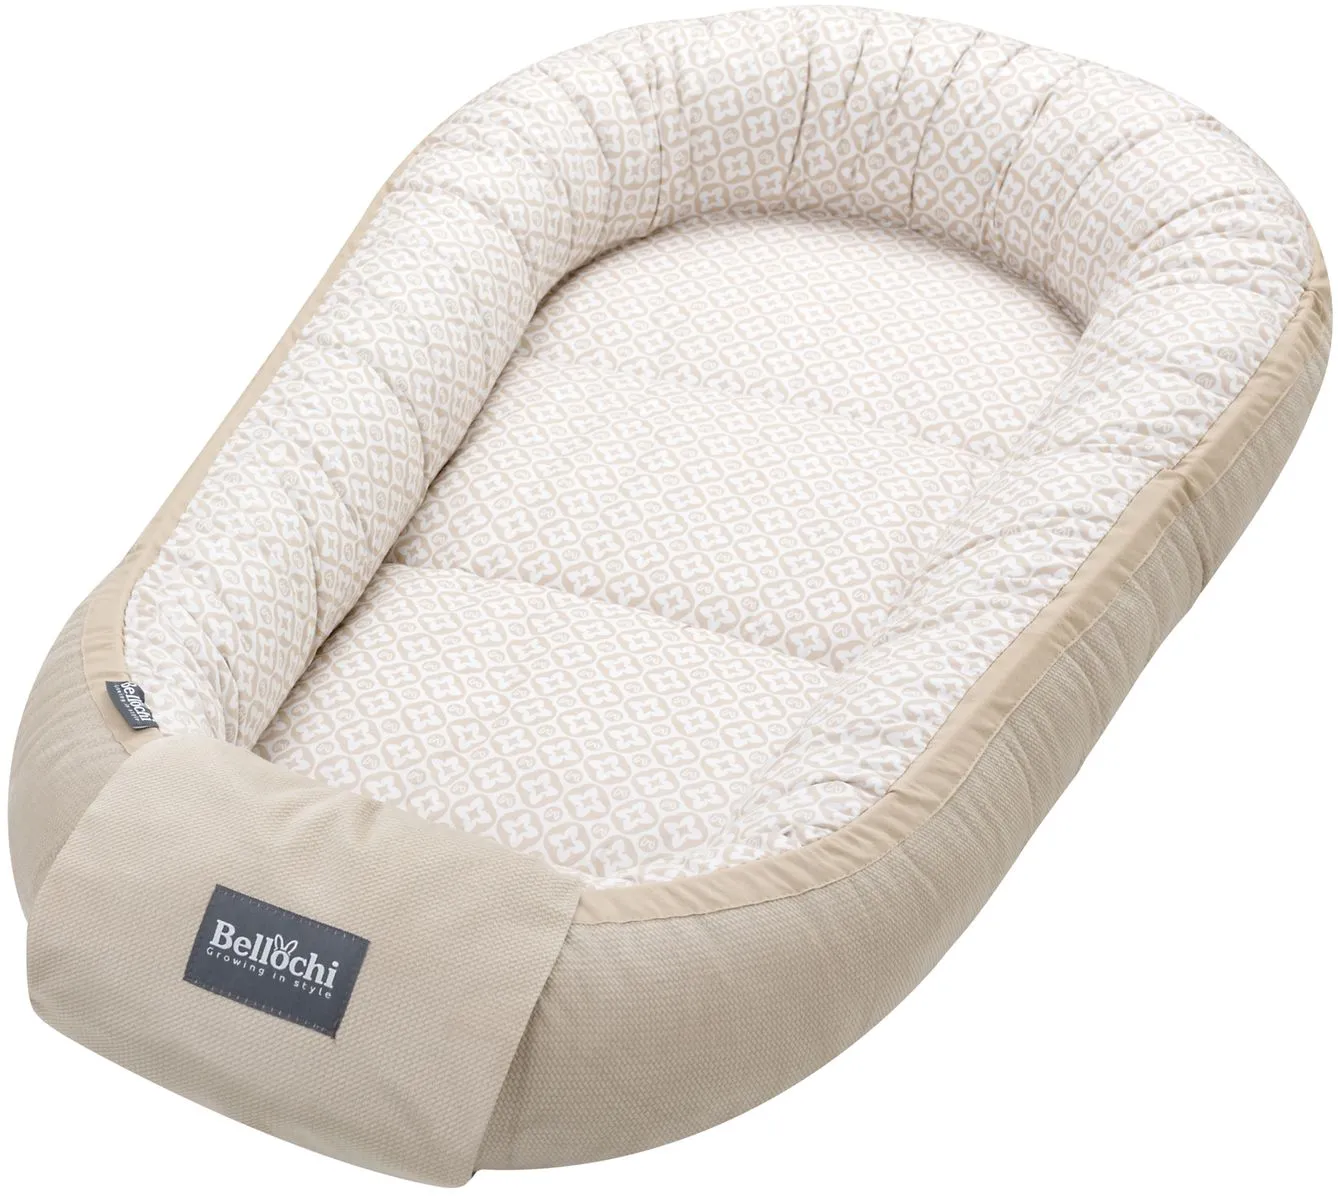 Baby nest 100×60 cm Lux Collection